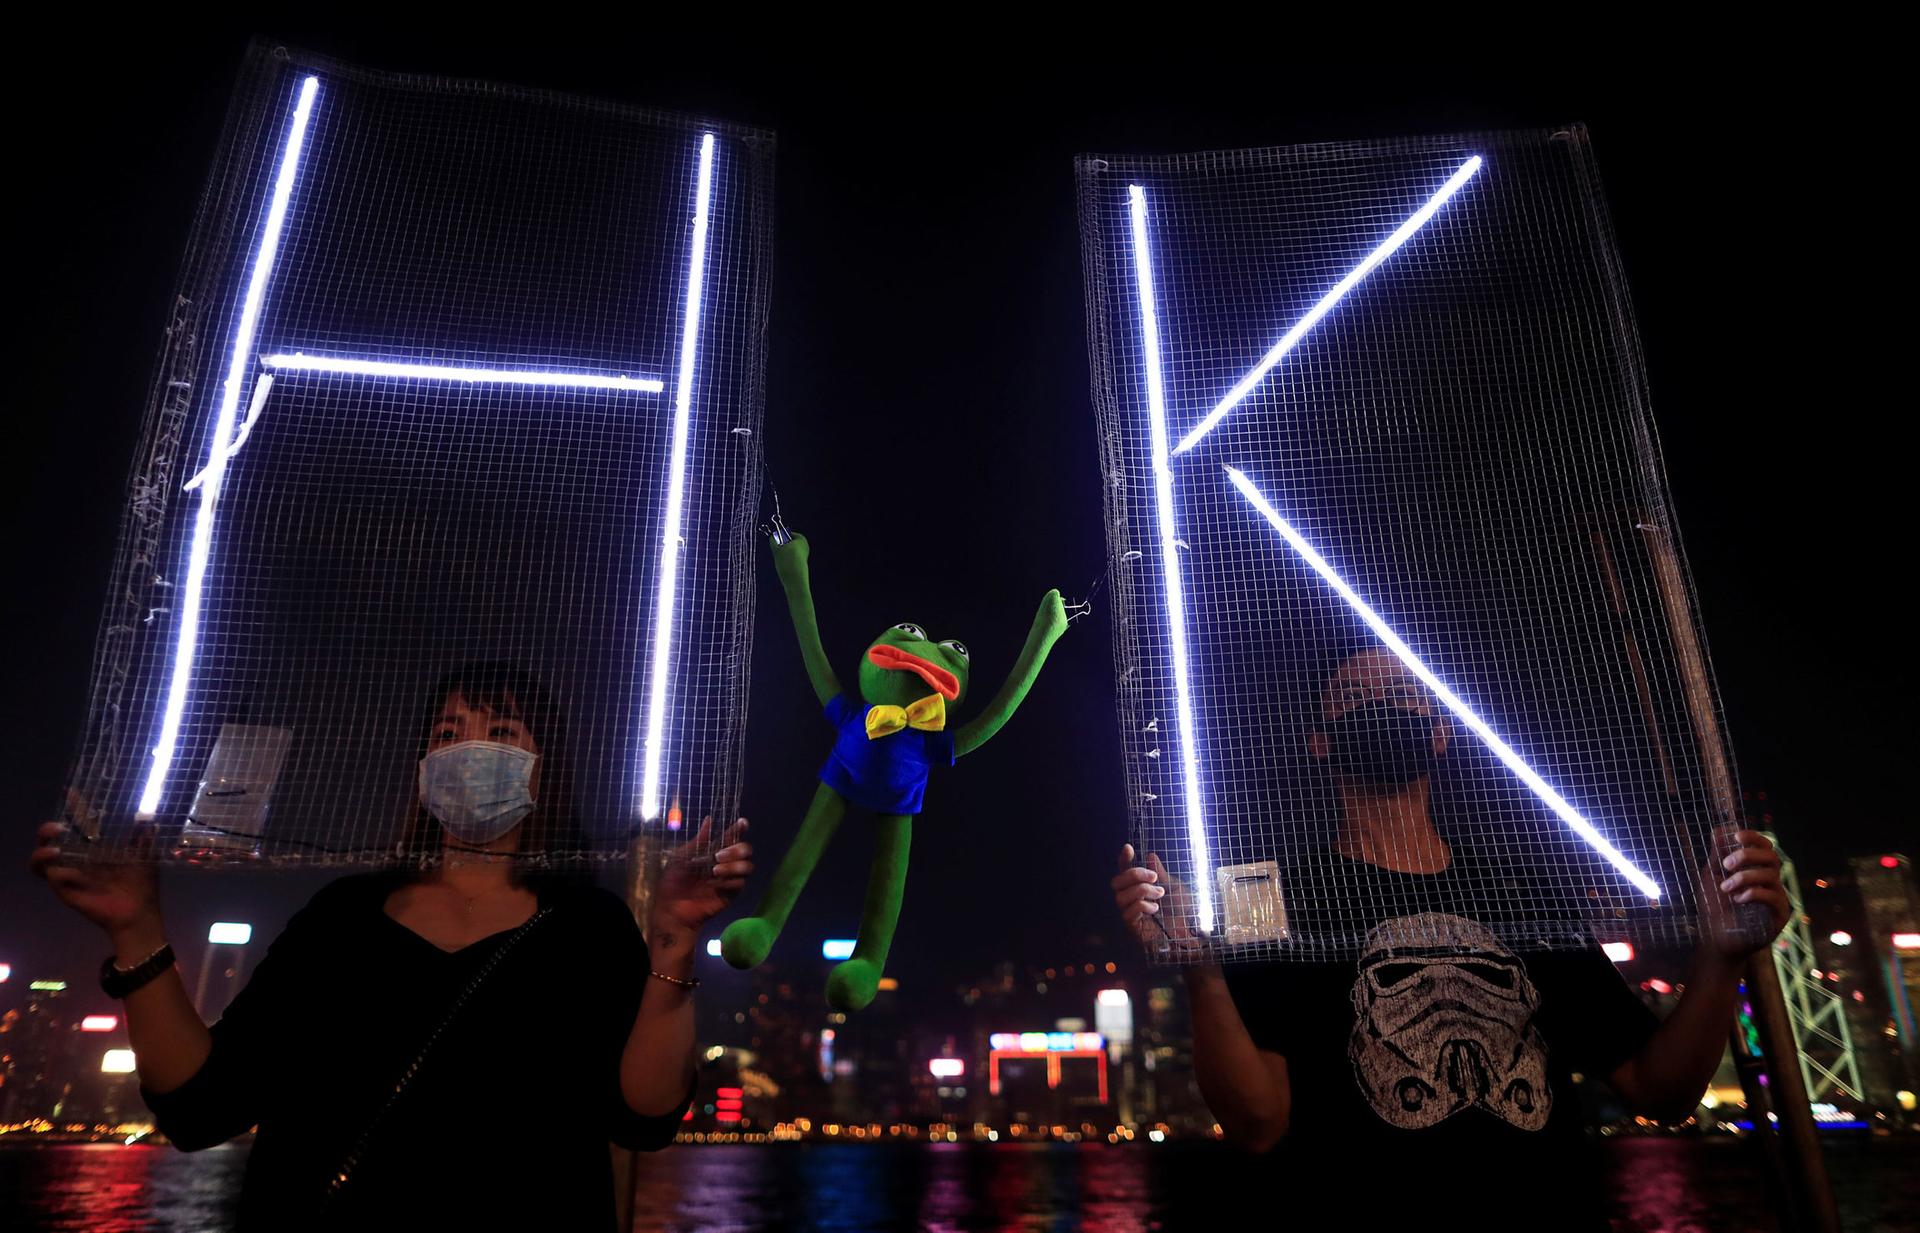 Two people are shown holding signs with electrified letters H and K with a Pepe the Frog plush toy inbetween.